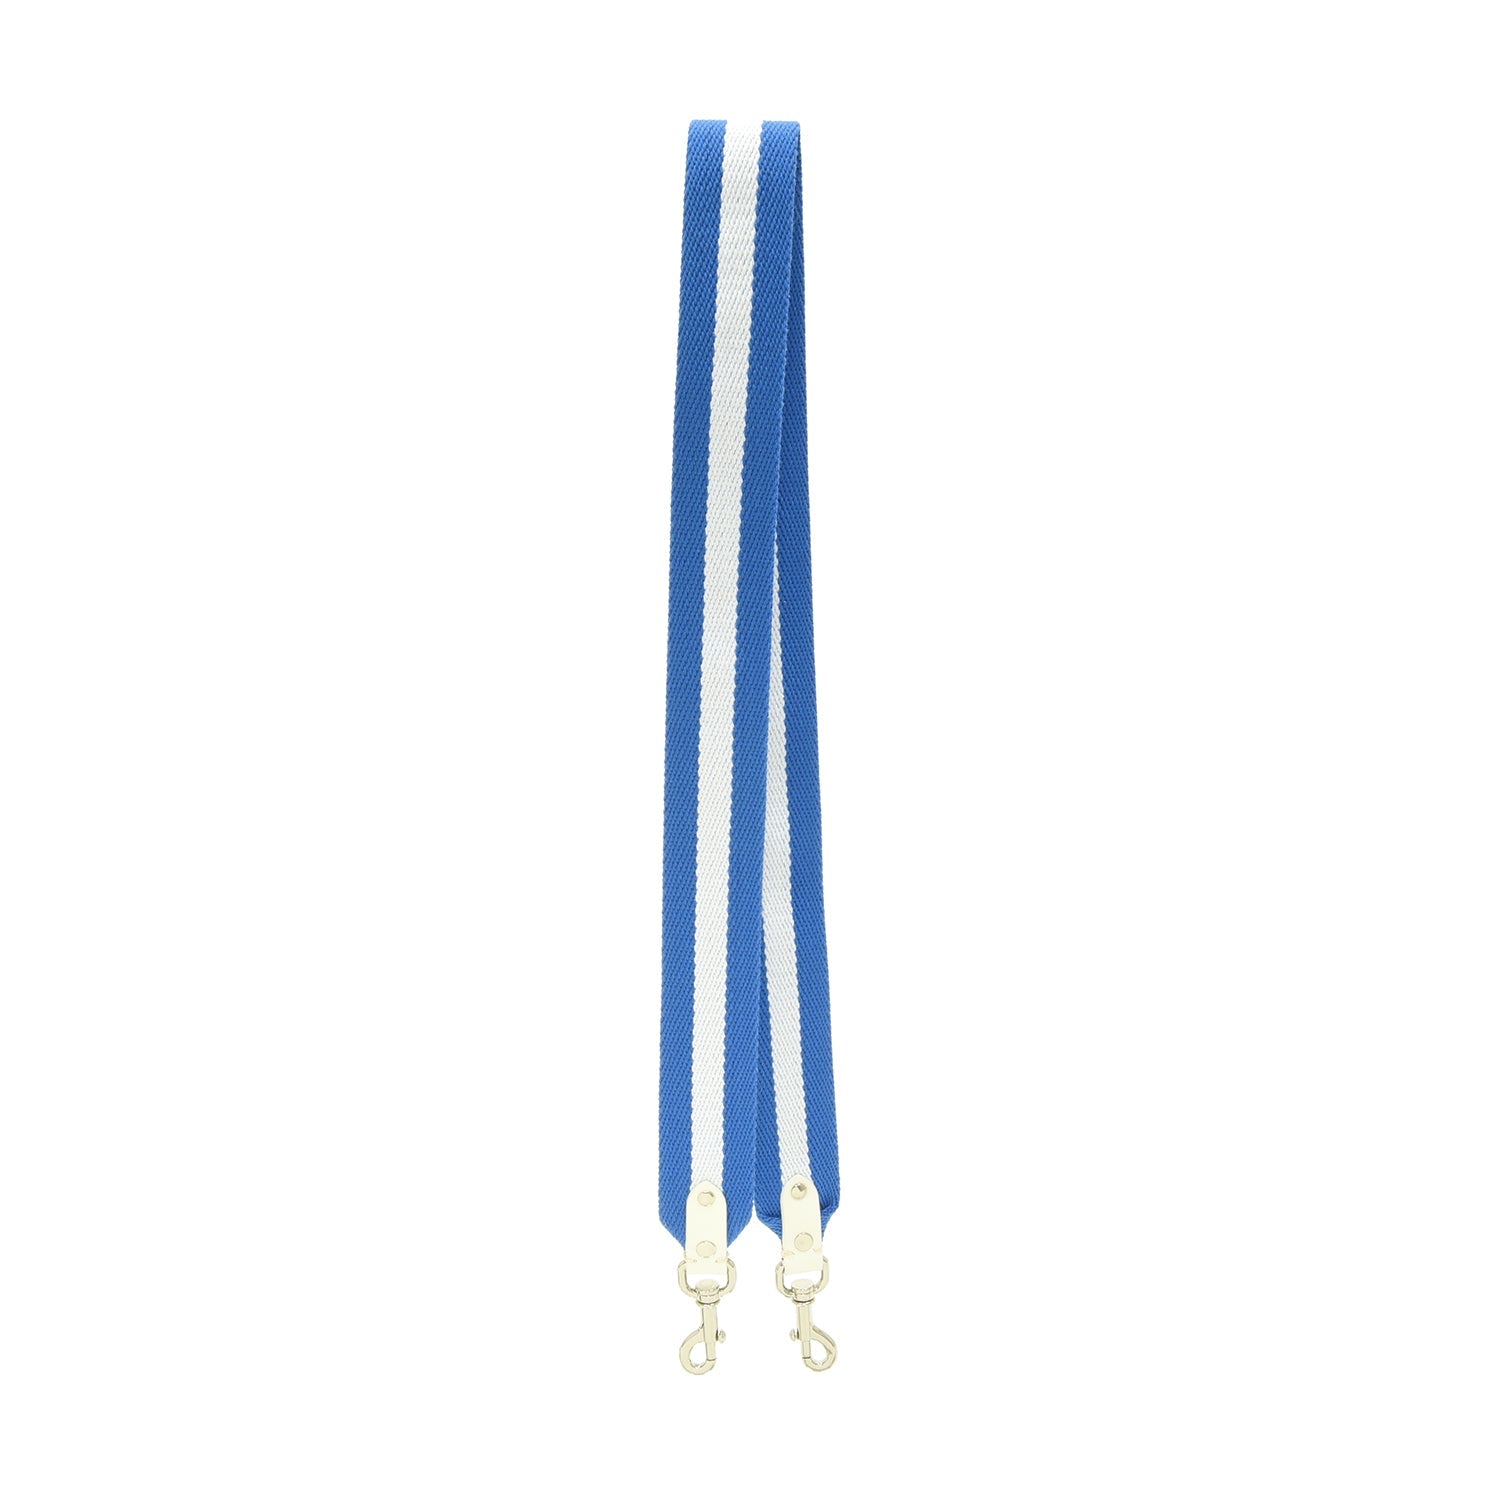 The London Square Collection · Shoulder Strap | Royal Blue/White - GLOBE-TROTTER